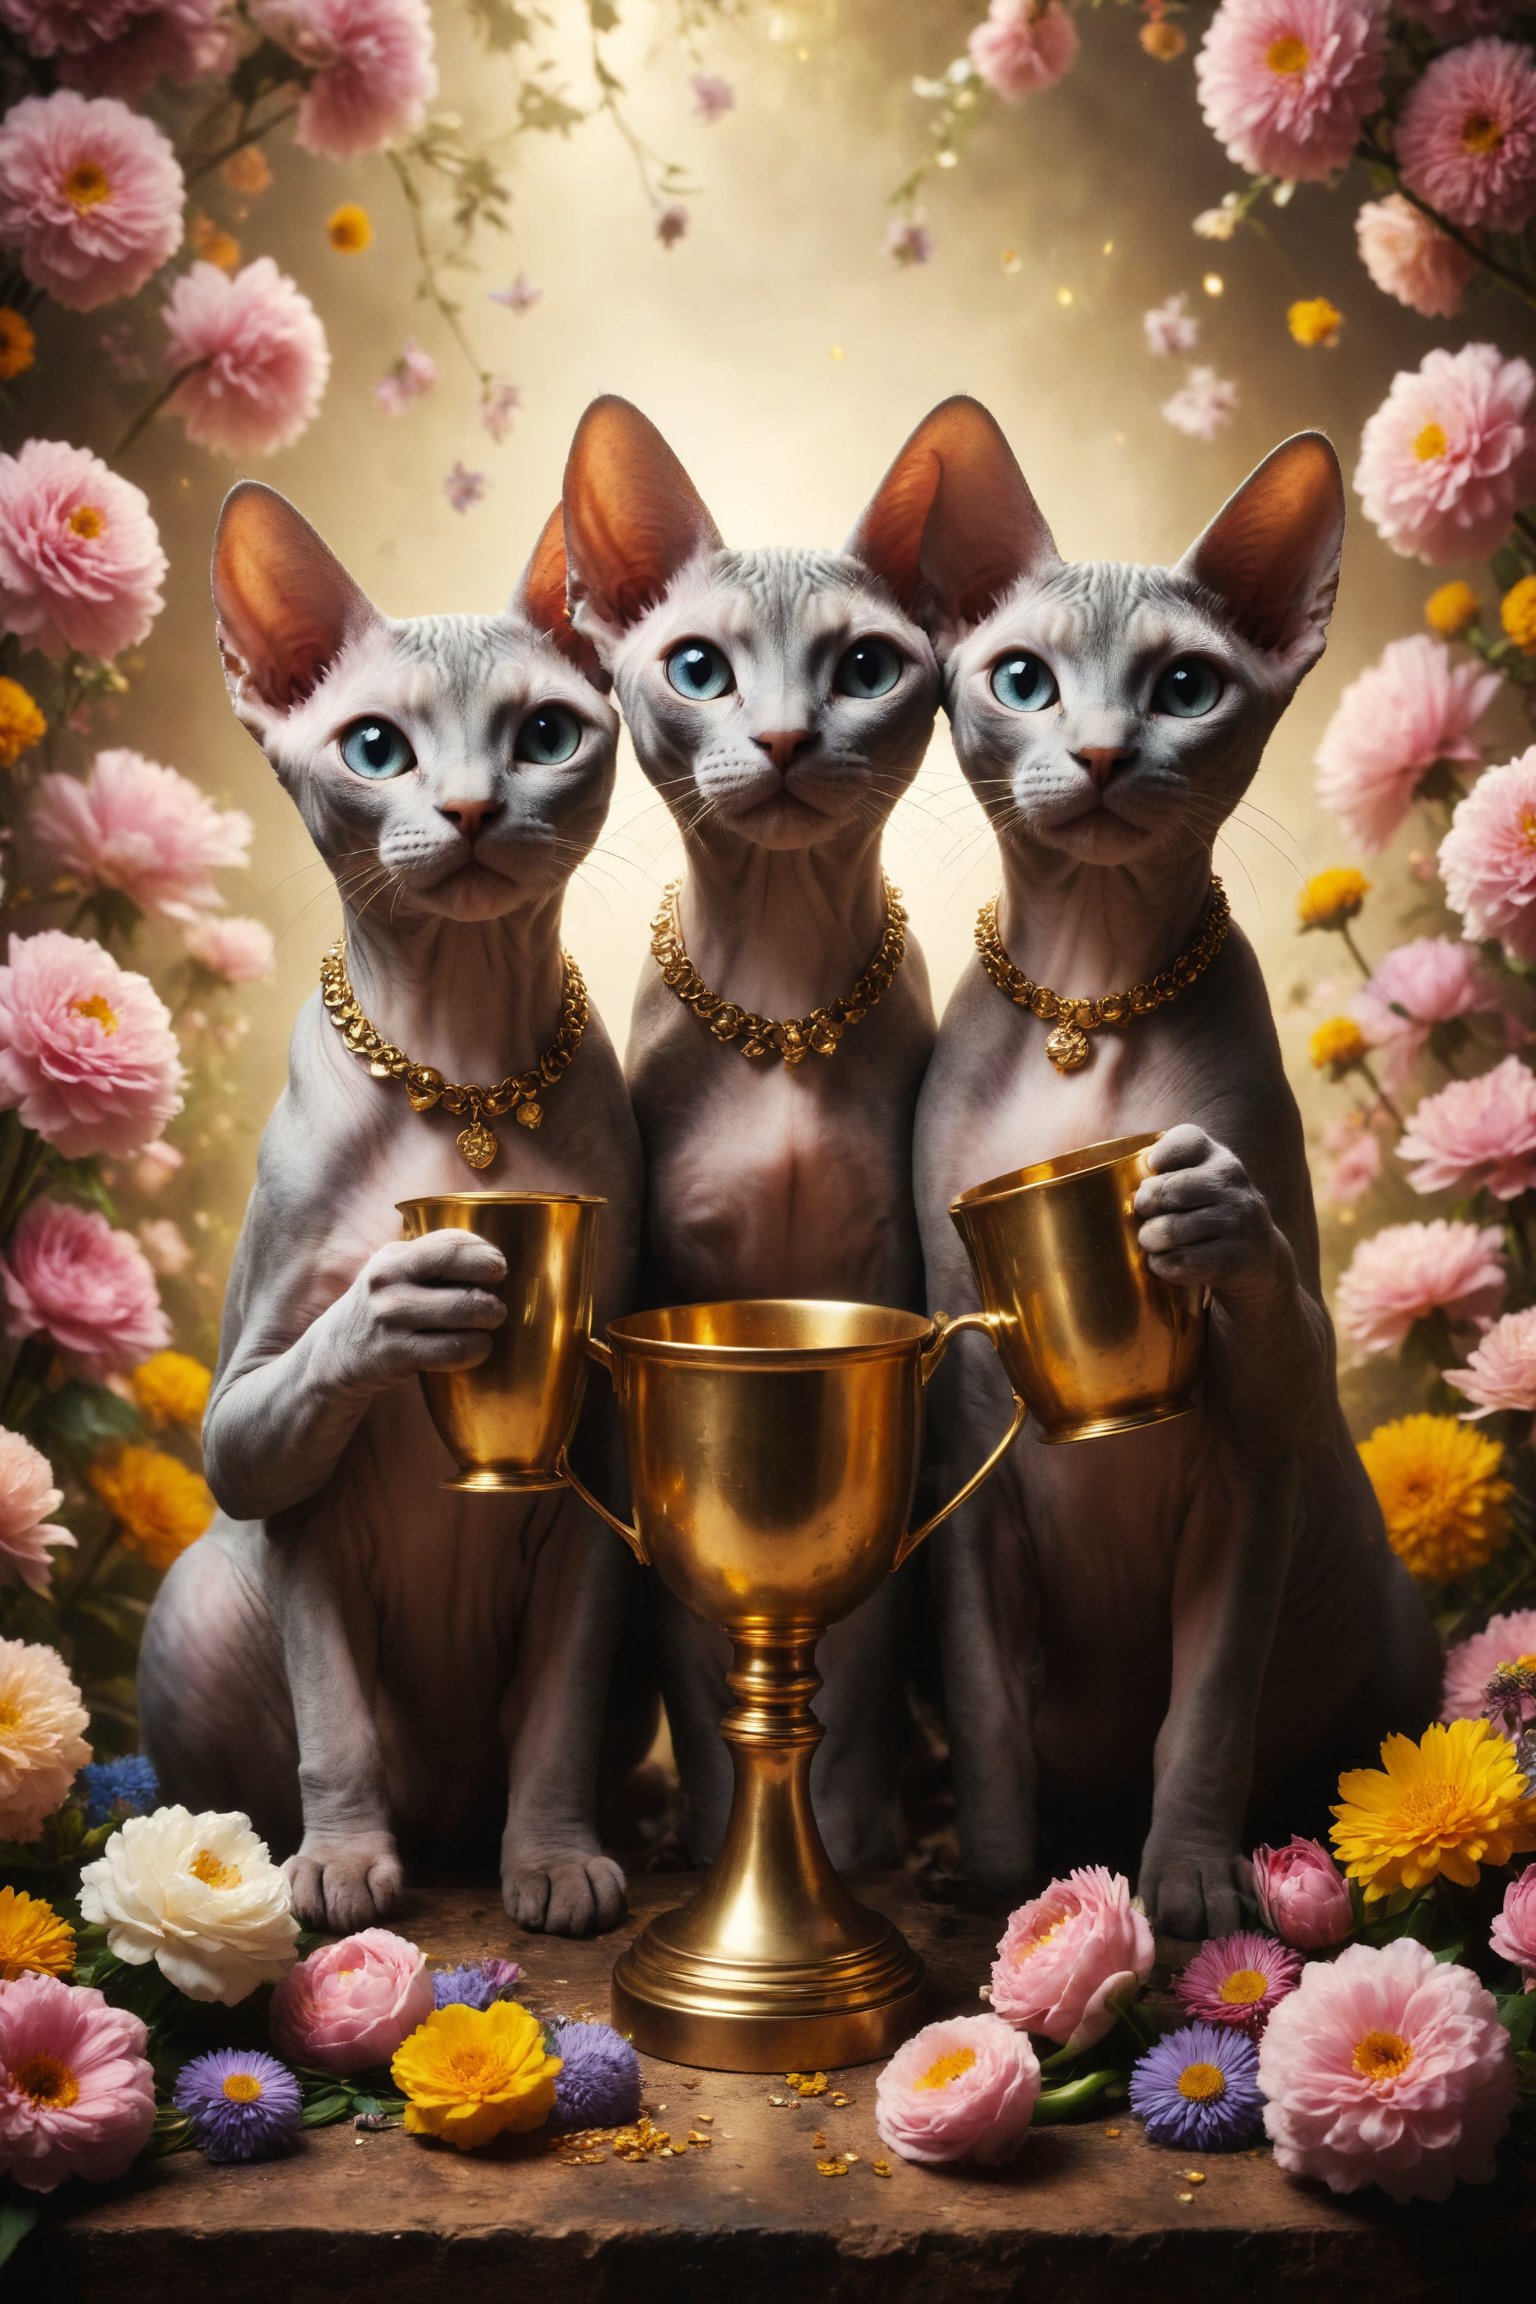 generate a image of three Sphynx cats celebrating together, each raising a gold metal cup, and surrounded by flowers, symbolizing friendship, joy and celebration.